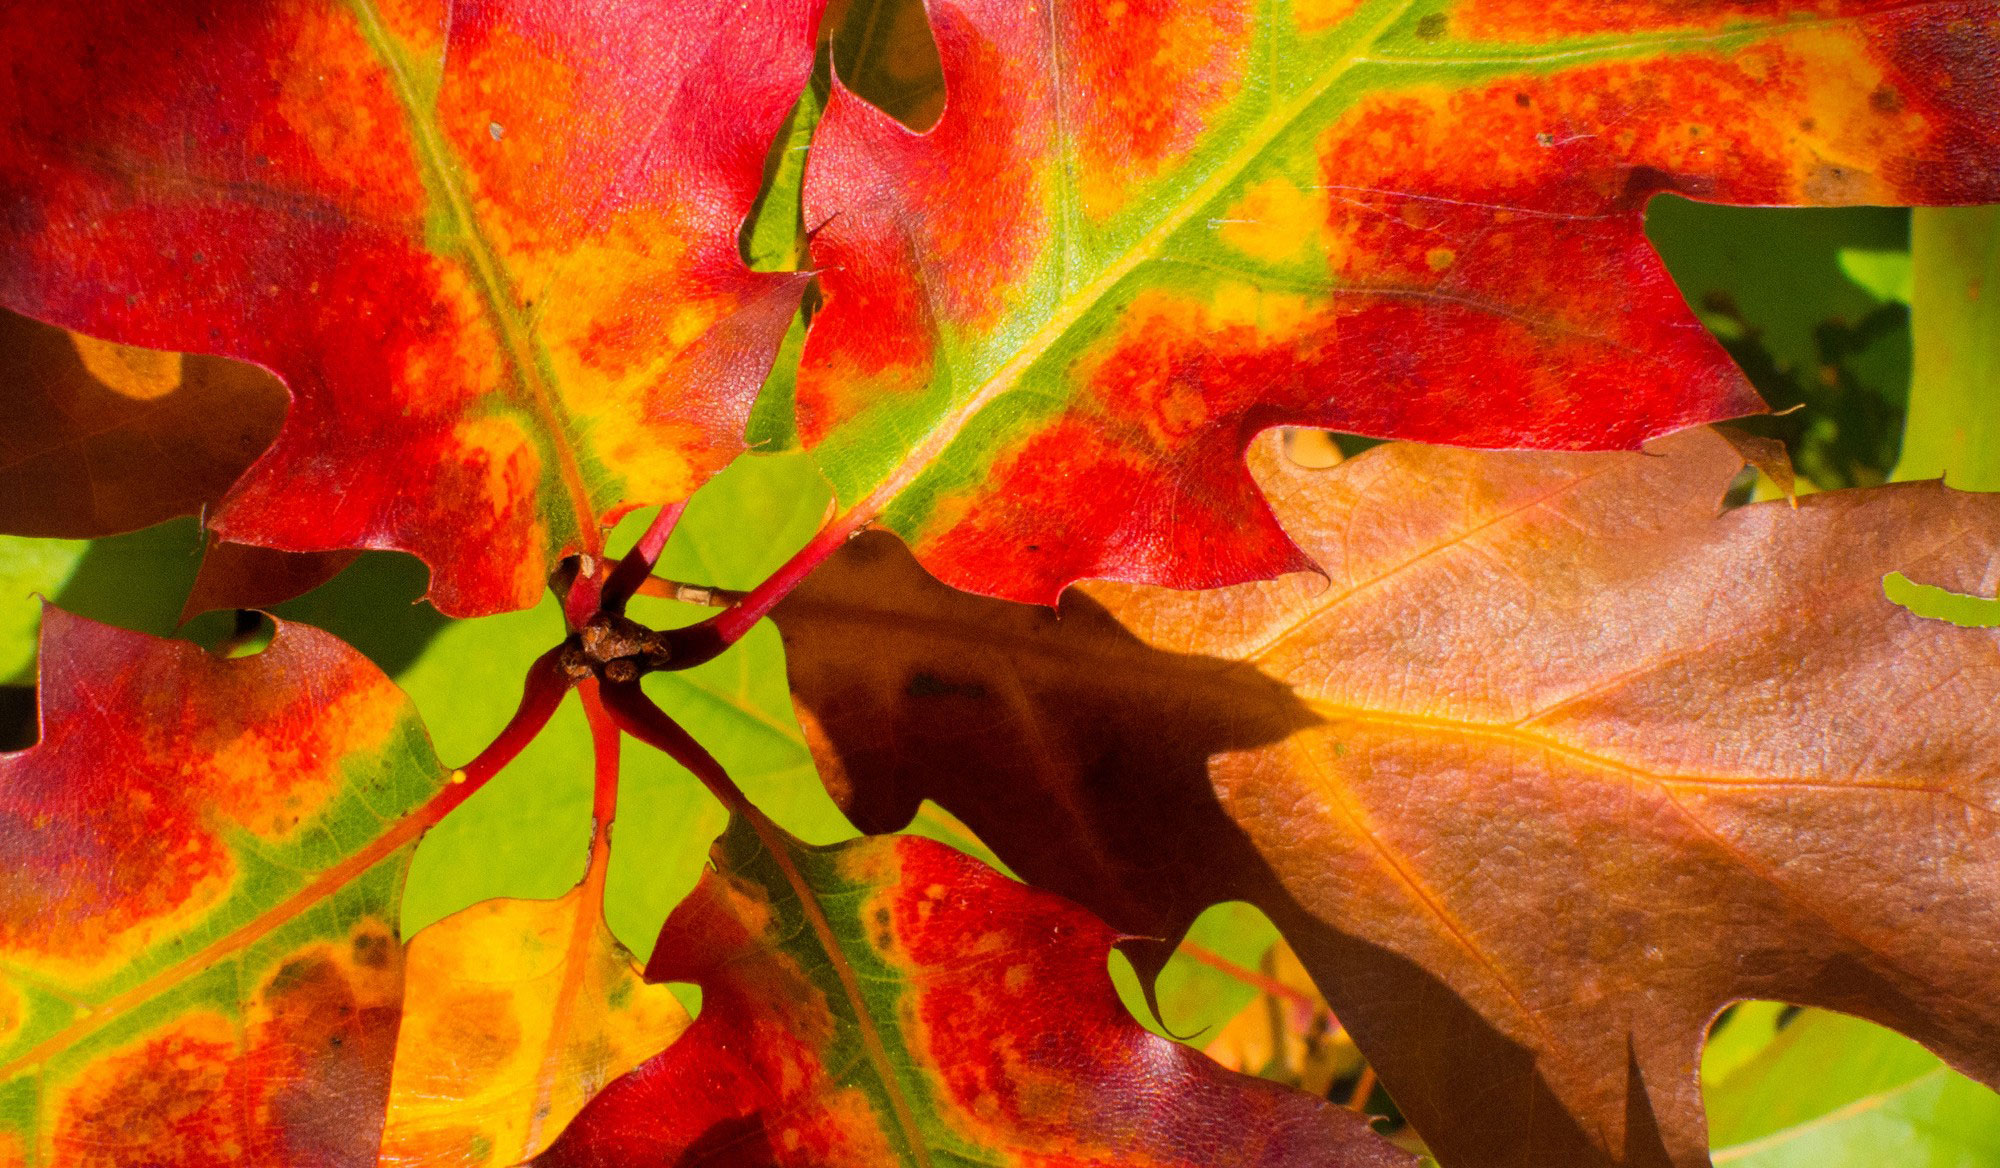 Gorgeous red, yellow, and green autumn leaves from enneafive of Flickr